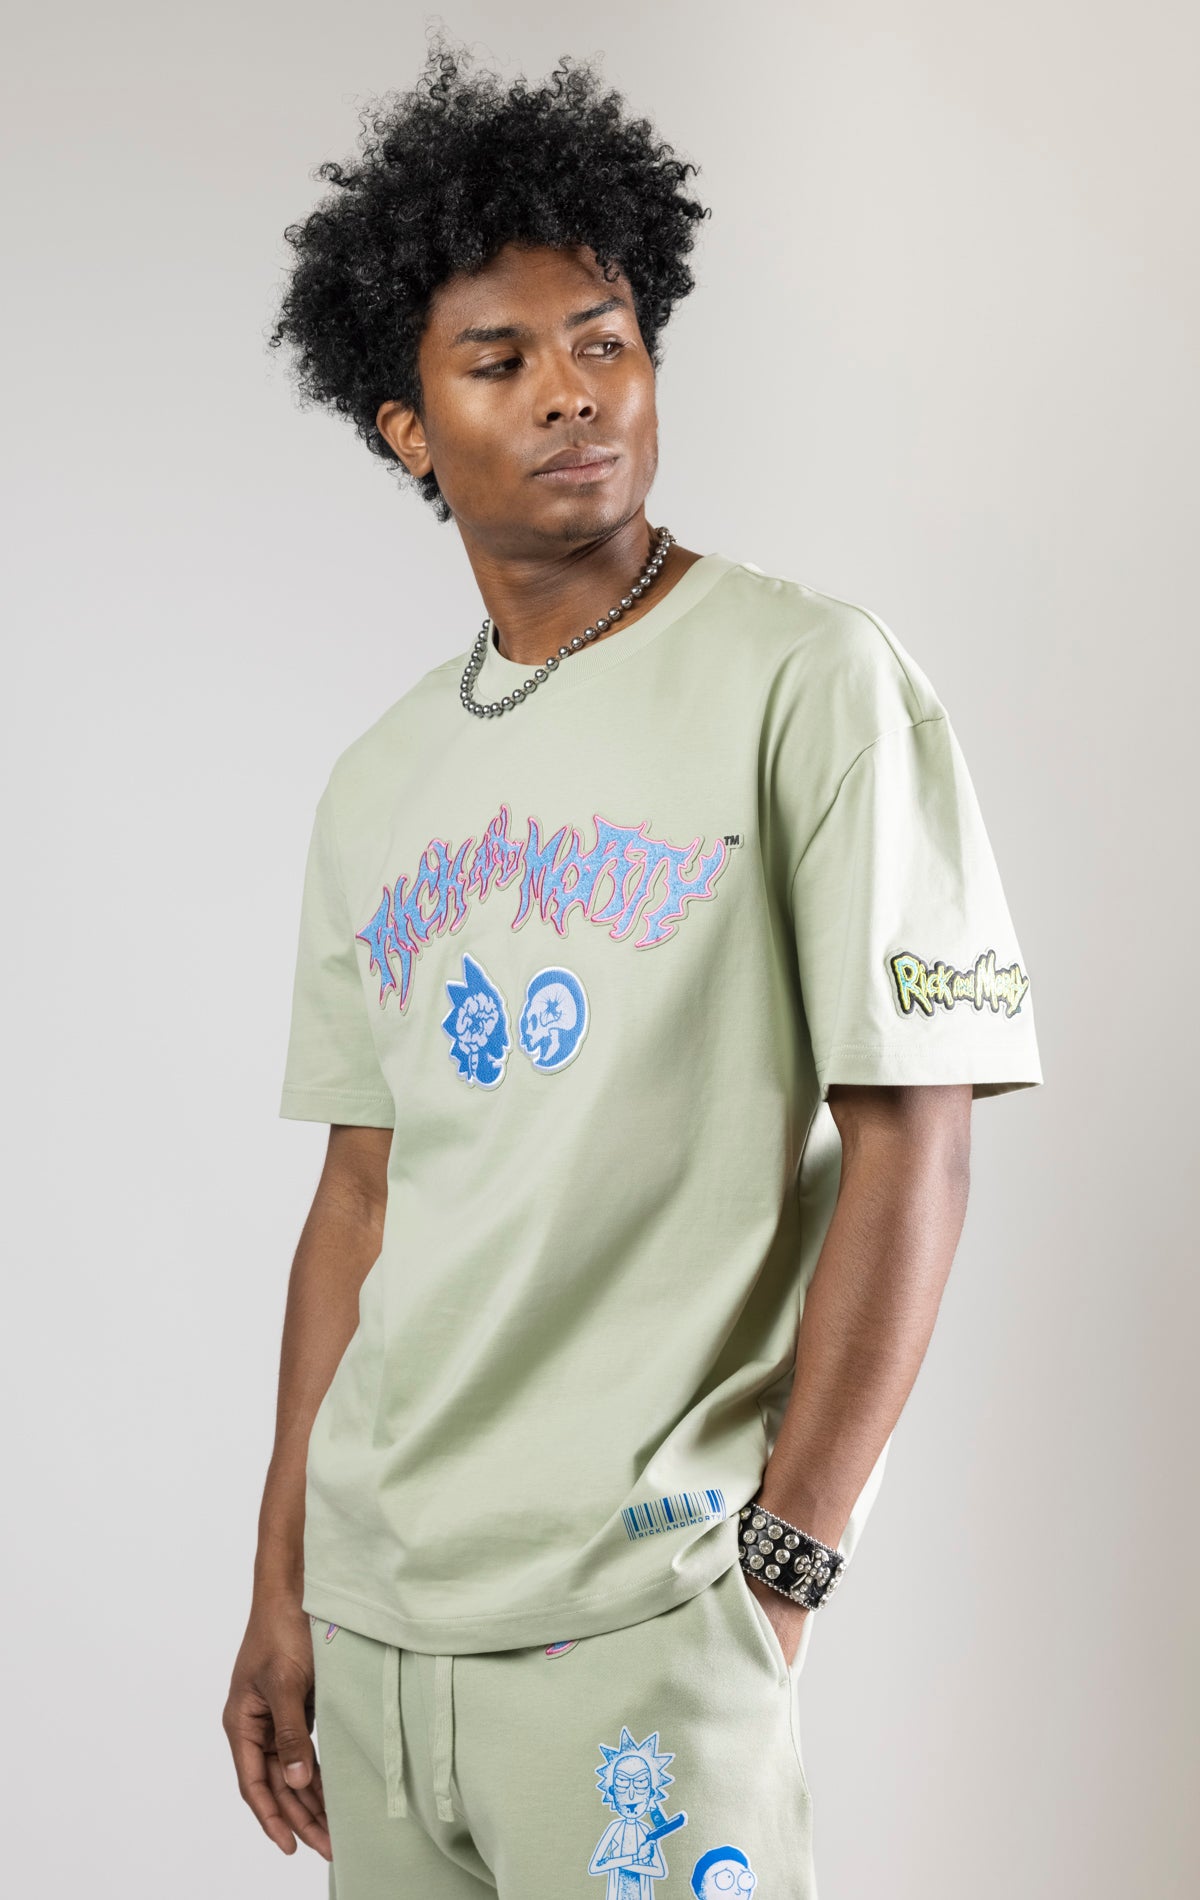 Rick And Morty graphic t-shirt in a relaxed fit with dropped shoulders and a crew neck. The shirt features heat-sealed graphics and a chenille applique with embroidered details.